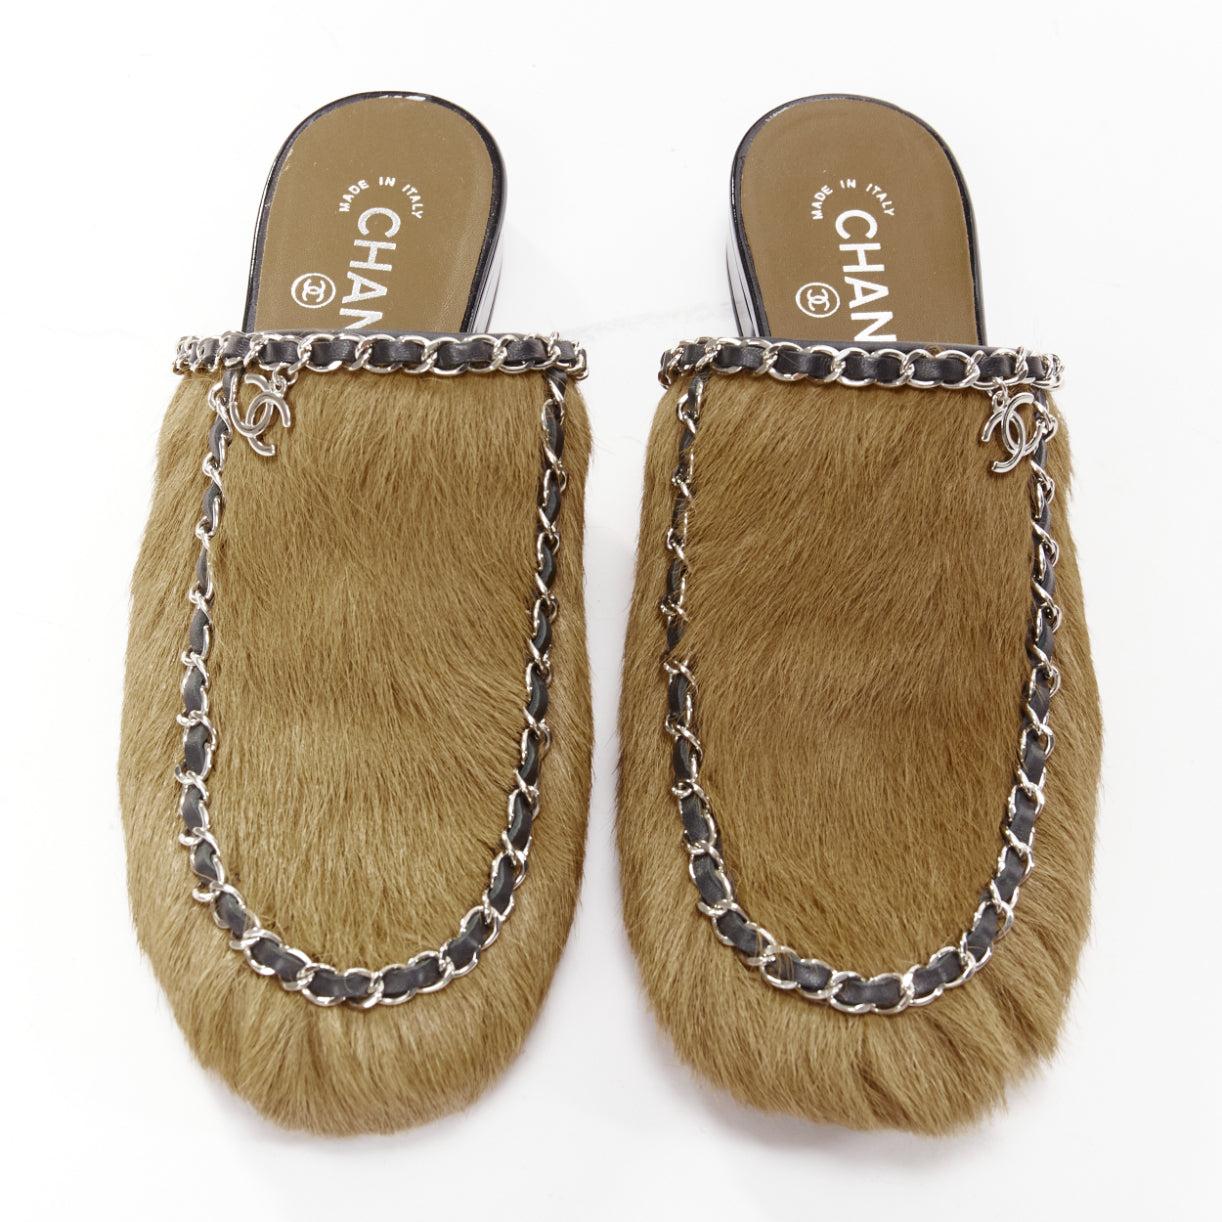 rare CHANEL brown calf hair CC logo charm black chain trim mule clog sandals EU38
Reference: TGAS/D01098
Brand: Chanel
Designer: Karl Lagerfeld
Material: Calf Hair, Leather
Color: Brown, Black
Pattern: Animal Print
Closure: Slip On
Lining: Nude